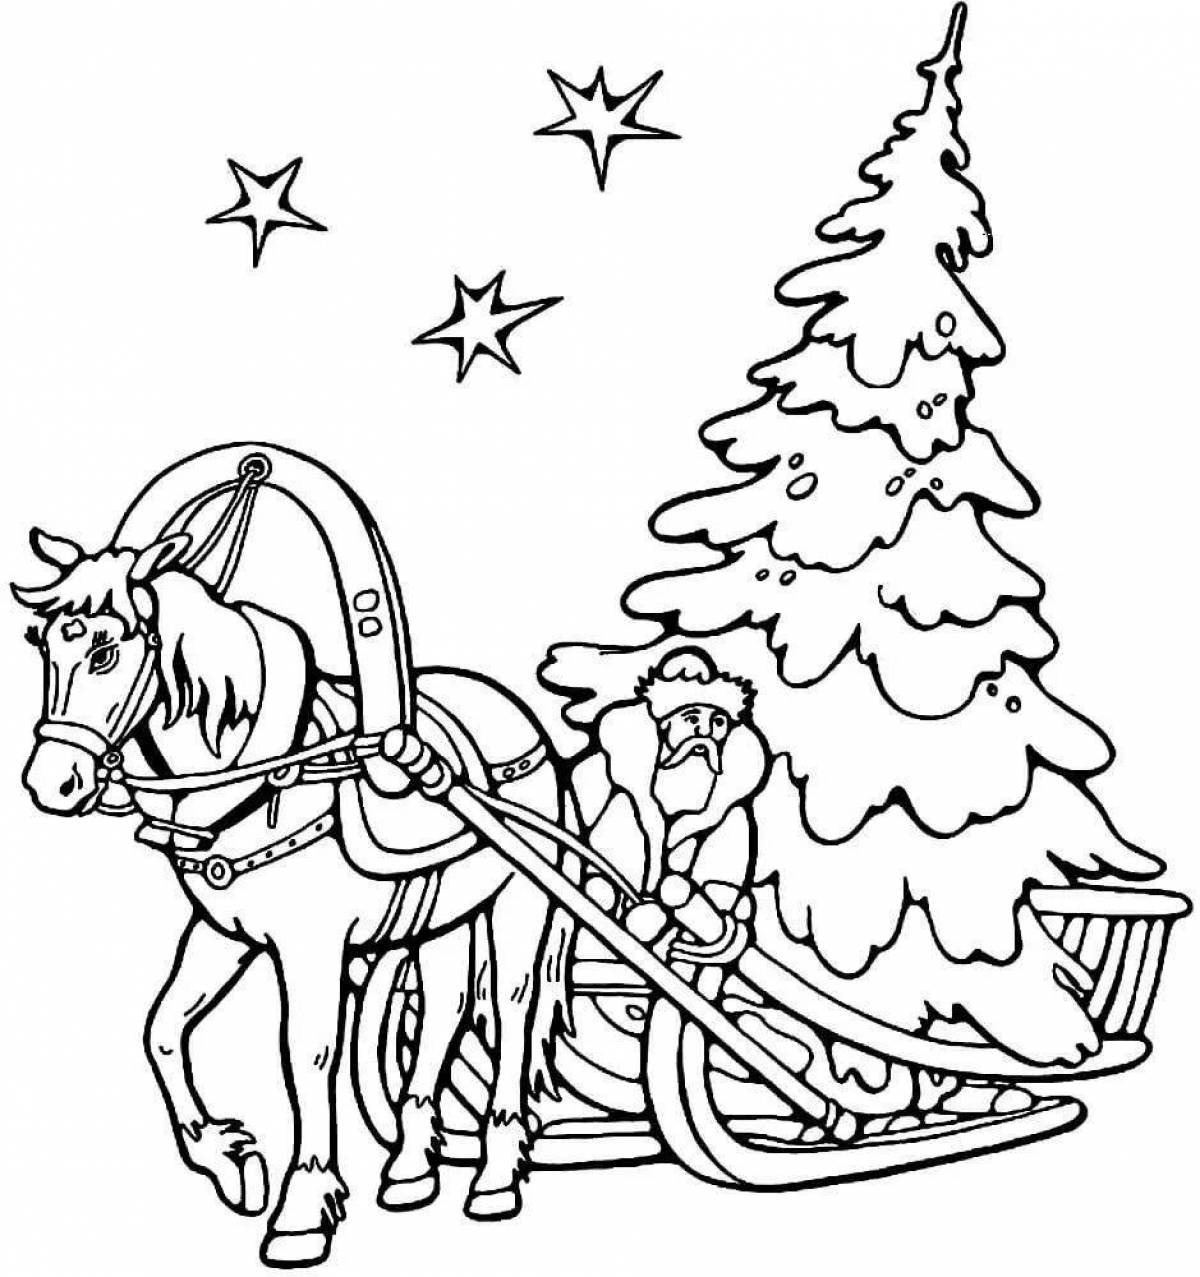 Dazzling Christmas coloring book for boys